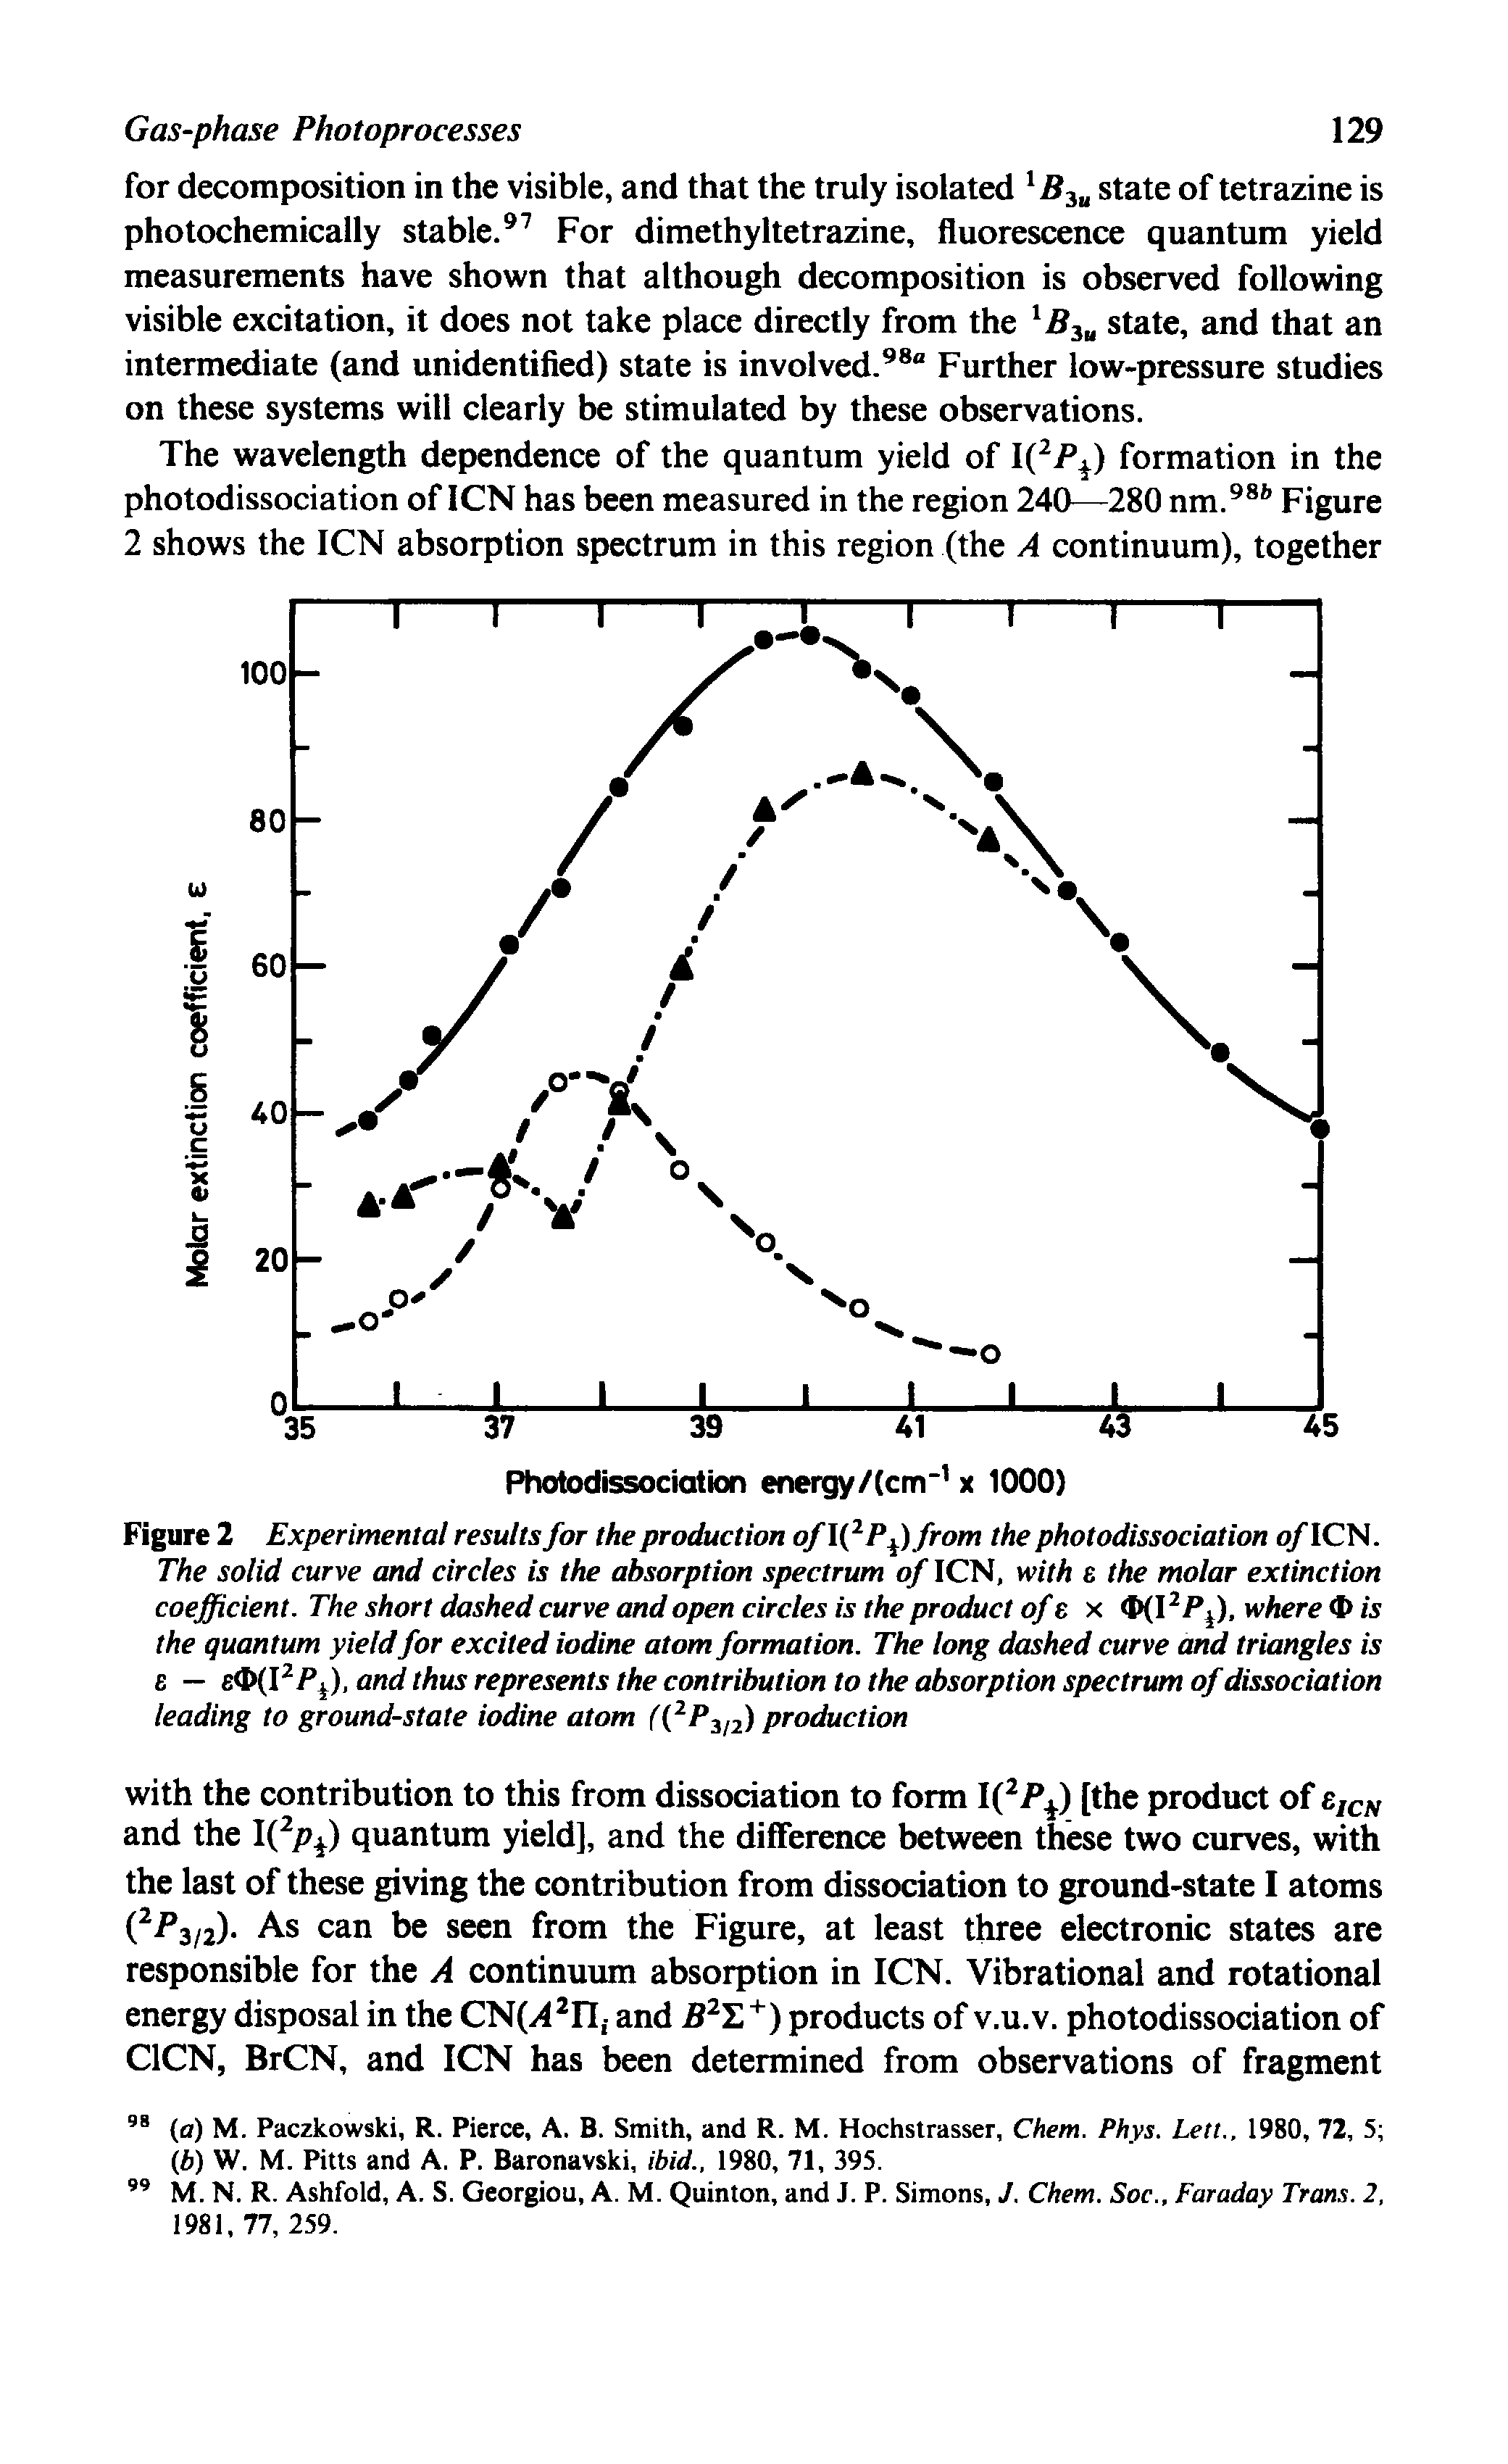 Figure 2 Experimental results for the production o/I( P ) from the photodissociation o/ICN. The solid curve and circles is the absorption spectrum of ICN, with e the molar extinction coefficient. The short dashed curve and open circles is the product of t x FP ), where 4> is the quantum yield for excited iodine atom formation. The long dashed curve and triangles is E — e (FP ), and thus represents the contribution to the absorption spectrum of dissociation leading to ground-state iodine atom production...